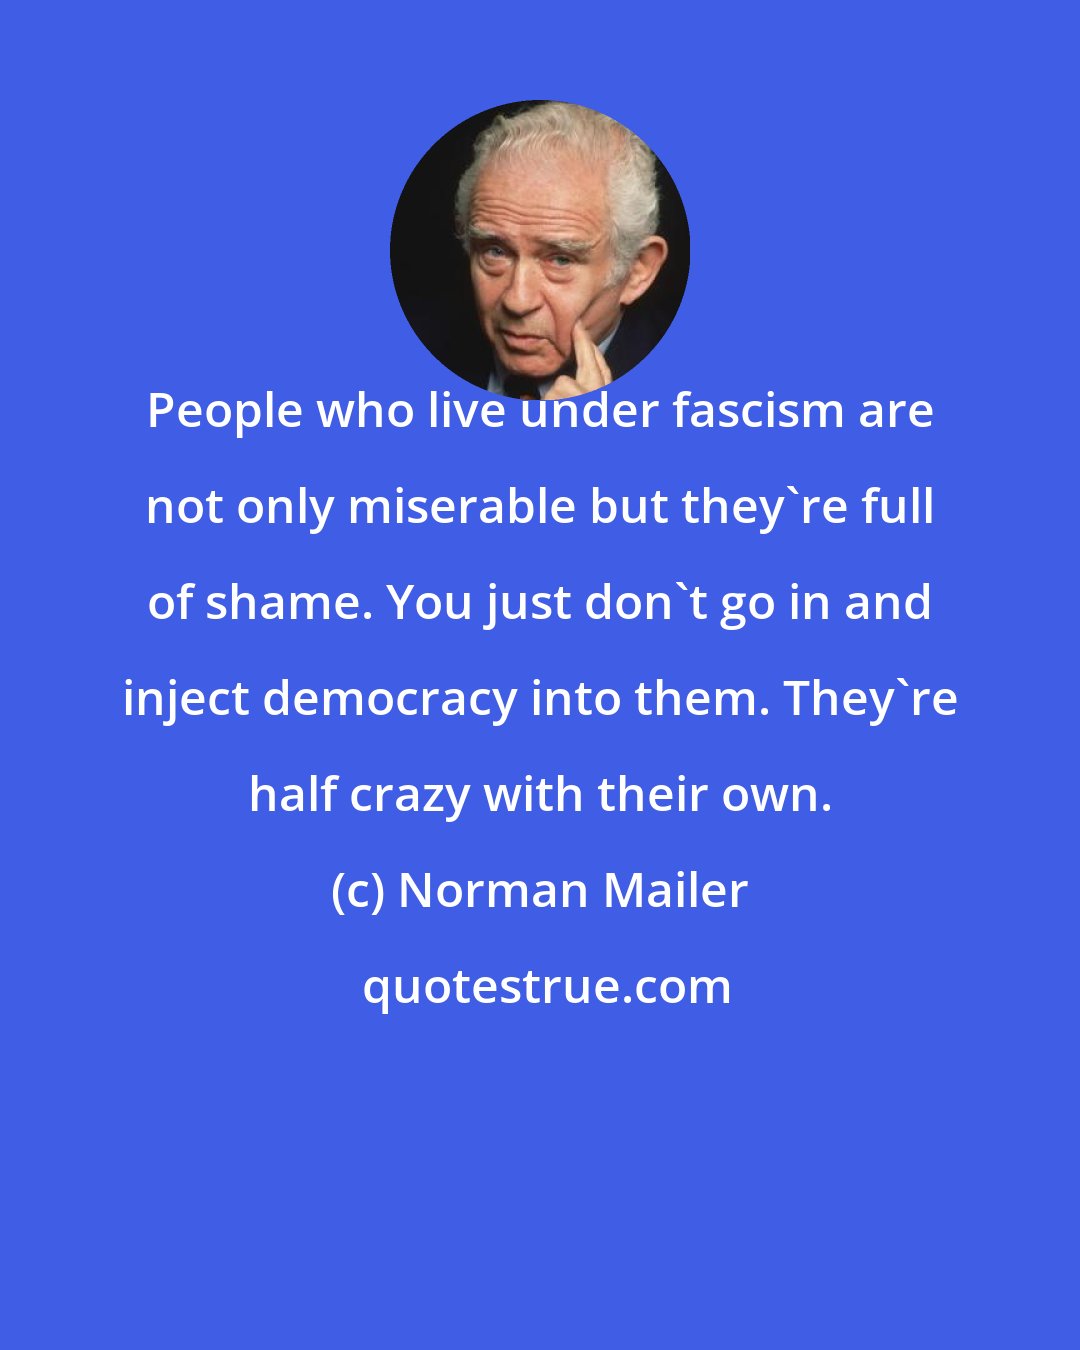 Norman Mailer: People who live under fascism are not only miserable but they're full of shame. You just don't go in and inject democracy into them. They're half crazy with their own.